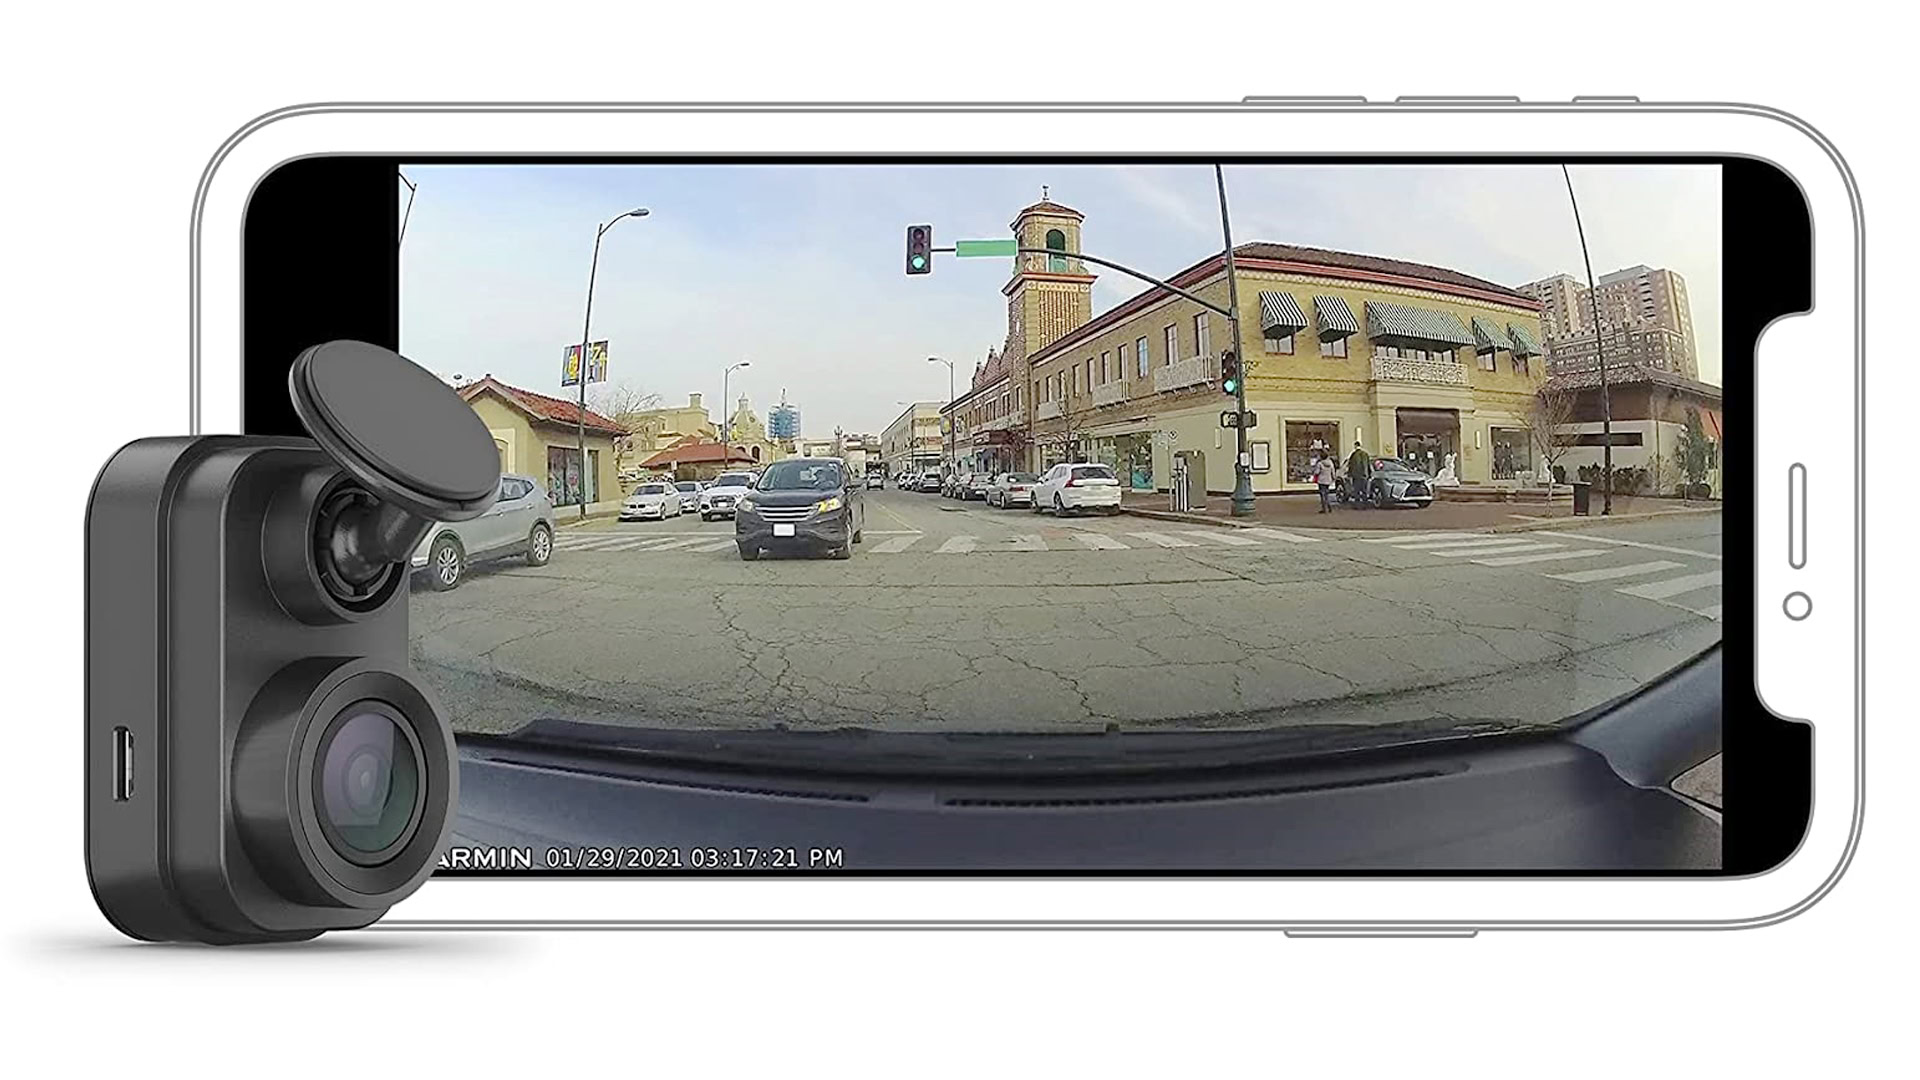 Car Security Cameras - Protect Your Vehicle With HD SurveillanceLaView